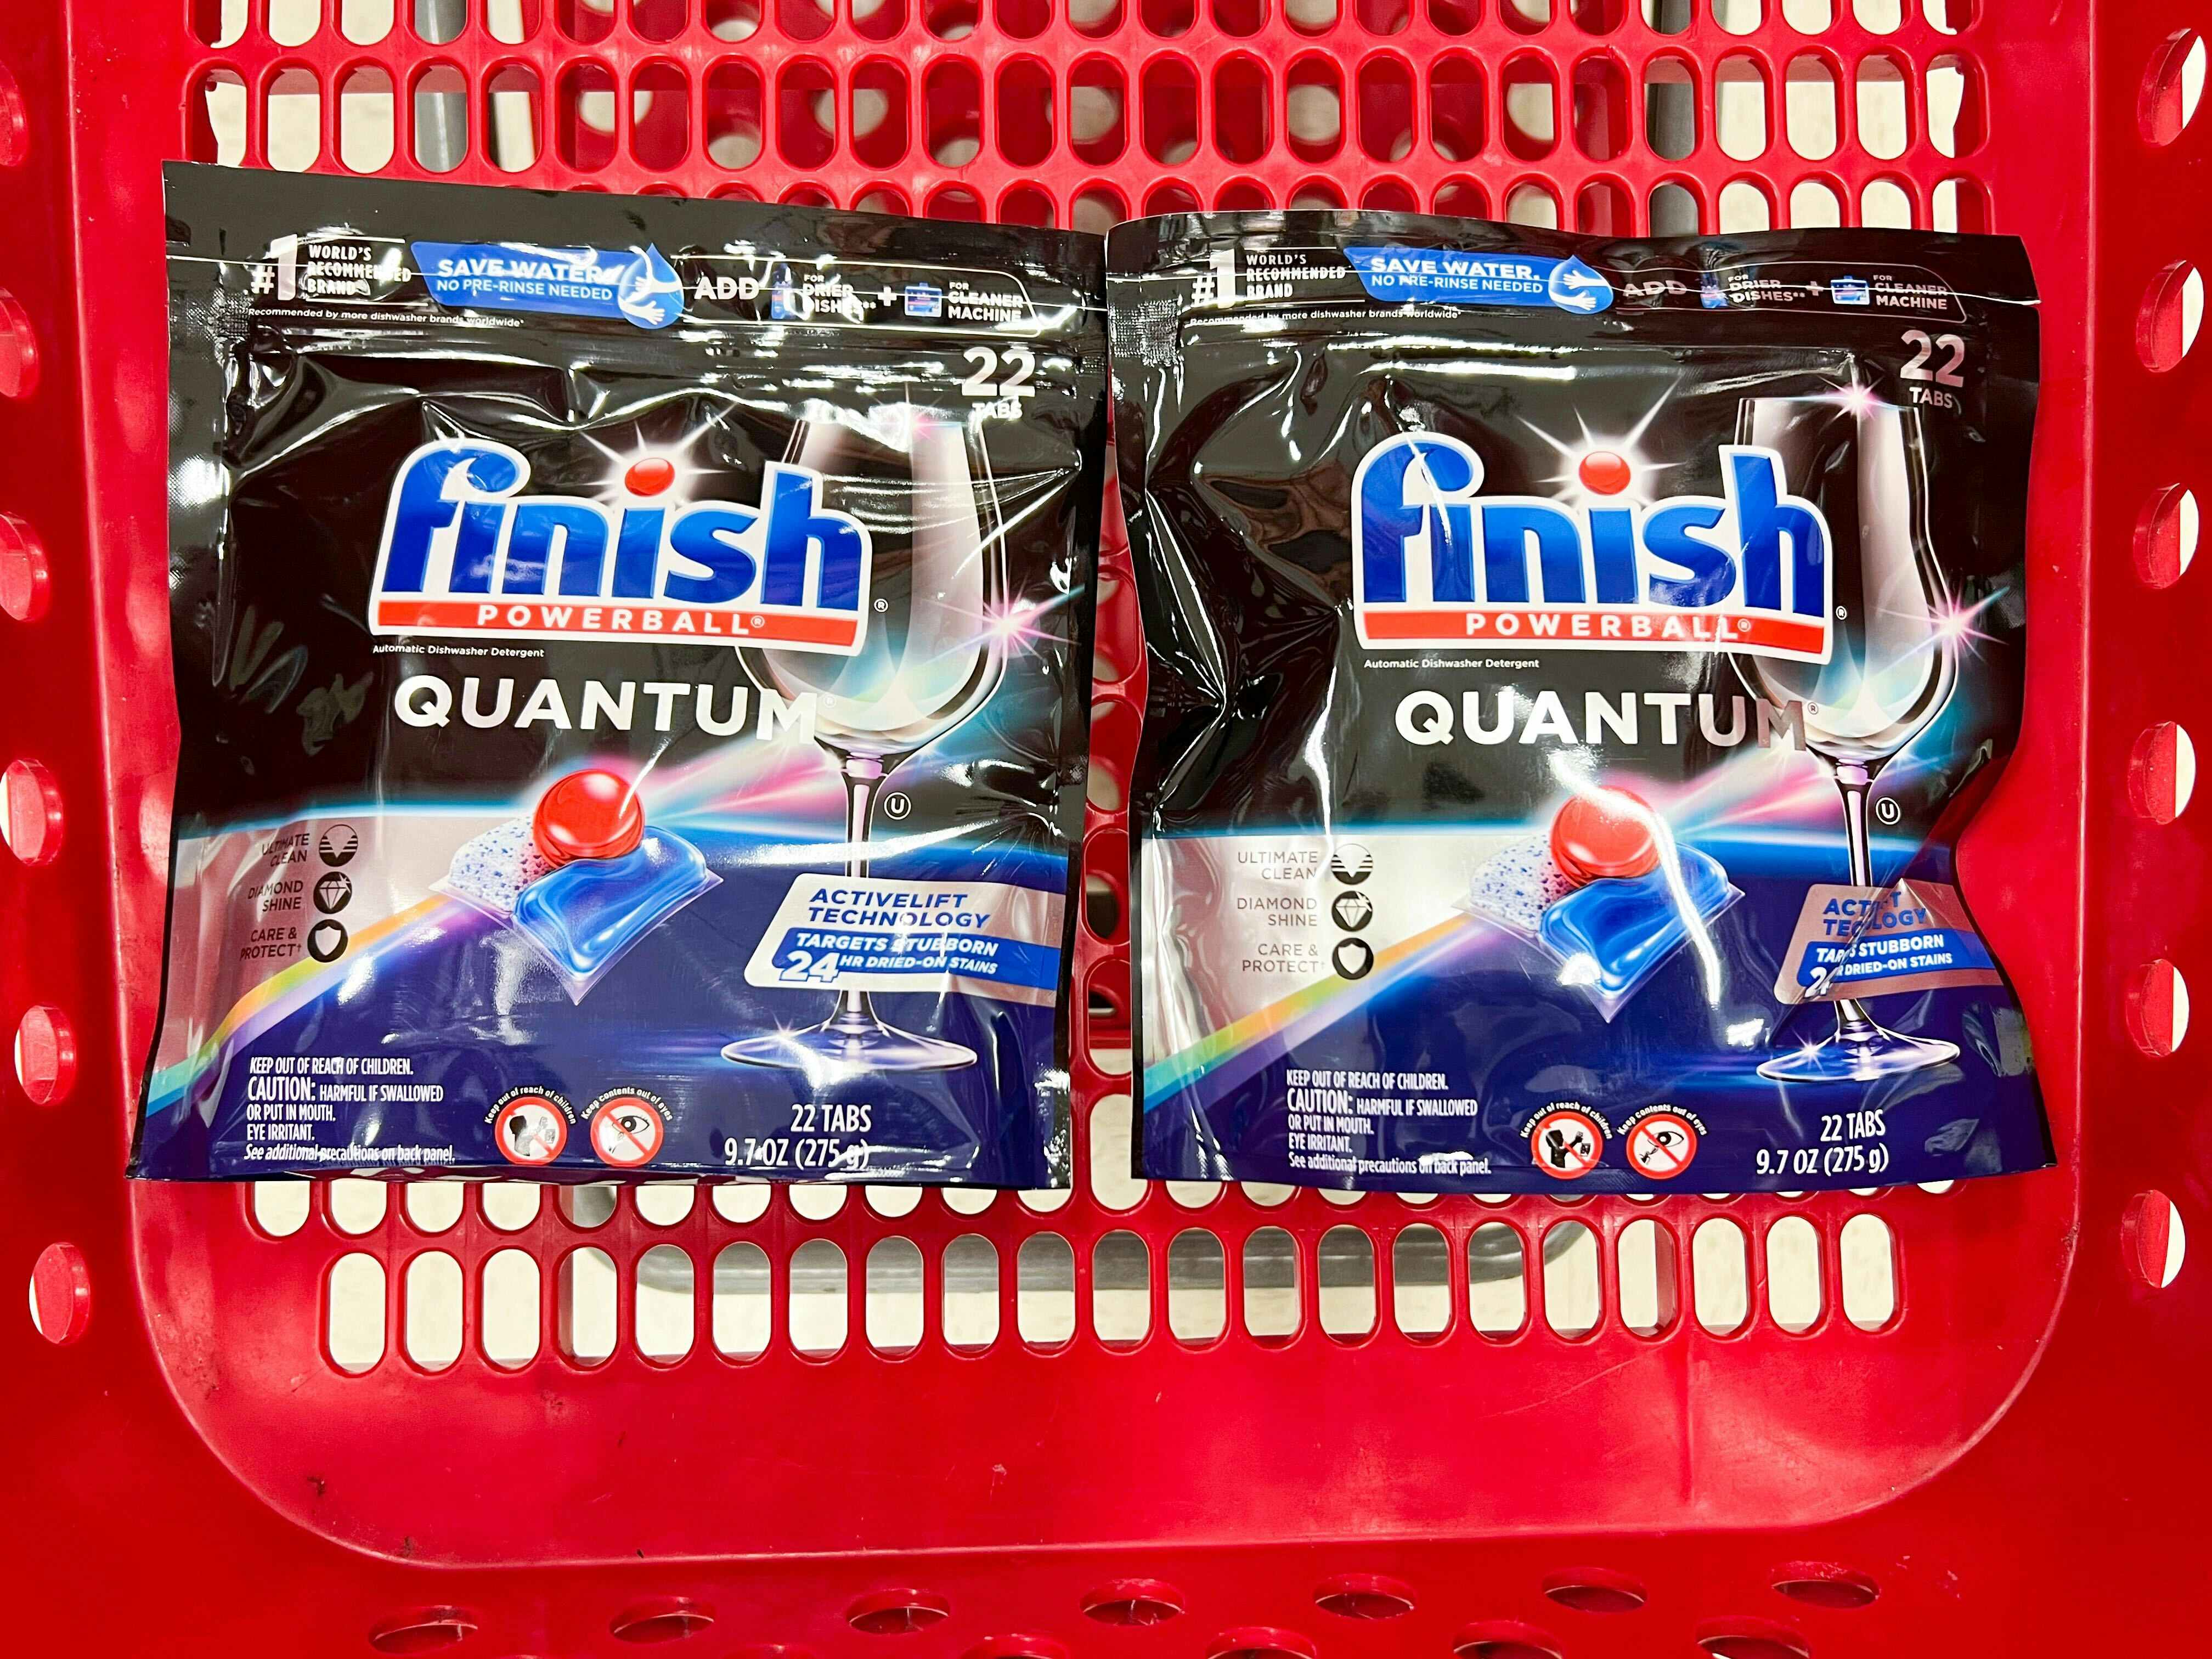 Two finish dishwasher packets in a target shopping cart